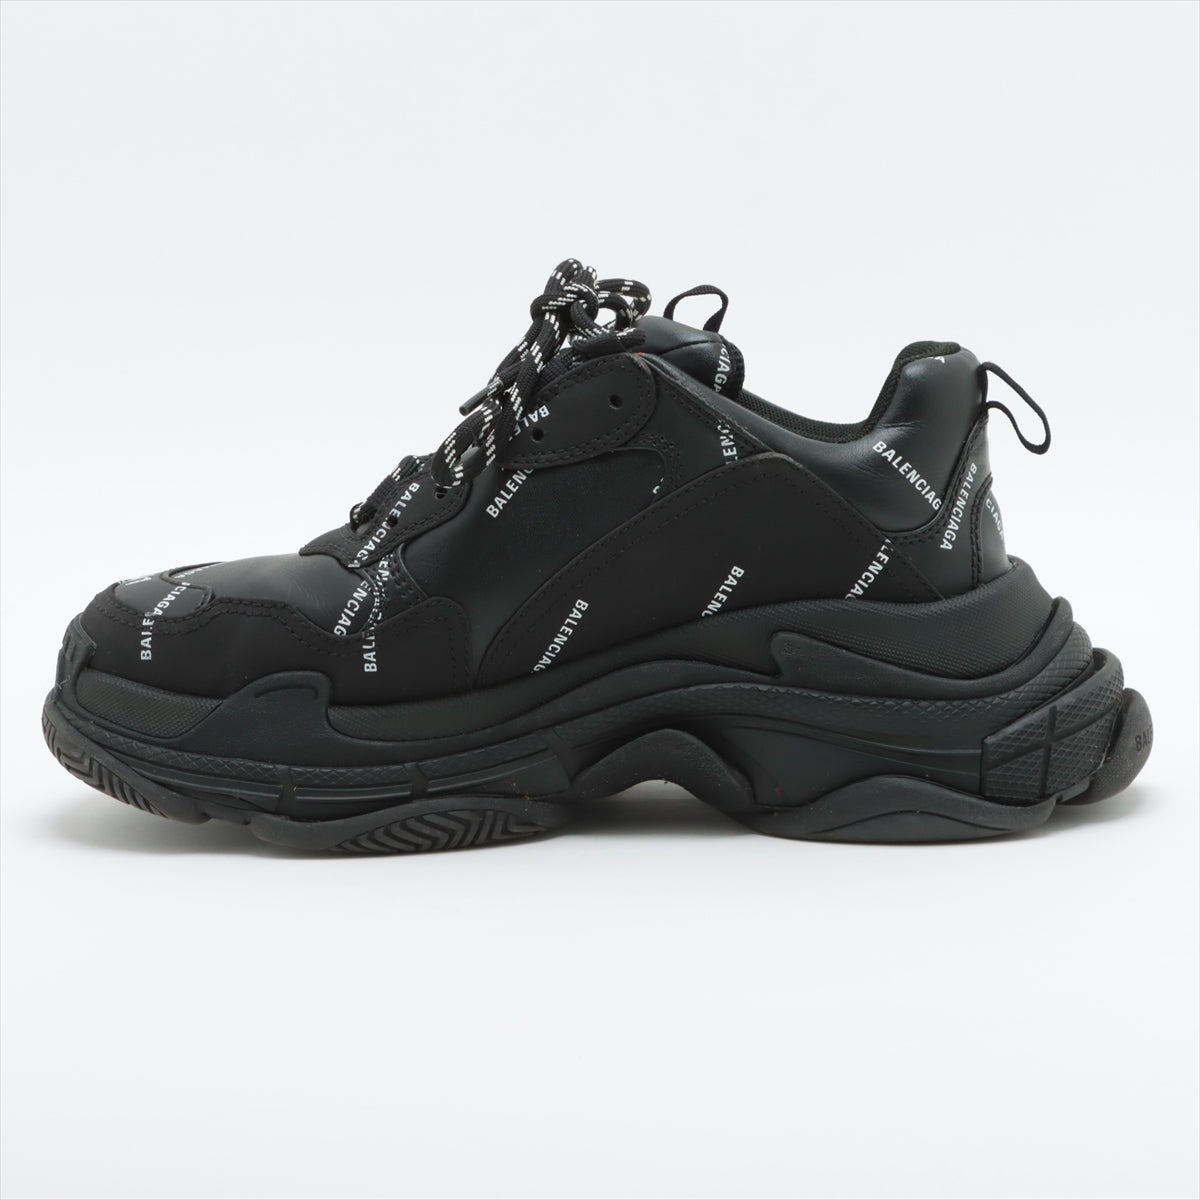 Balenciaga Triple s Leather Sneakers 41 Men's Black 536737 Is there a replacement string